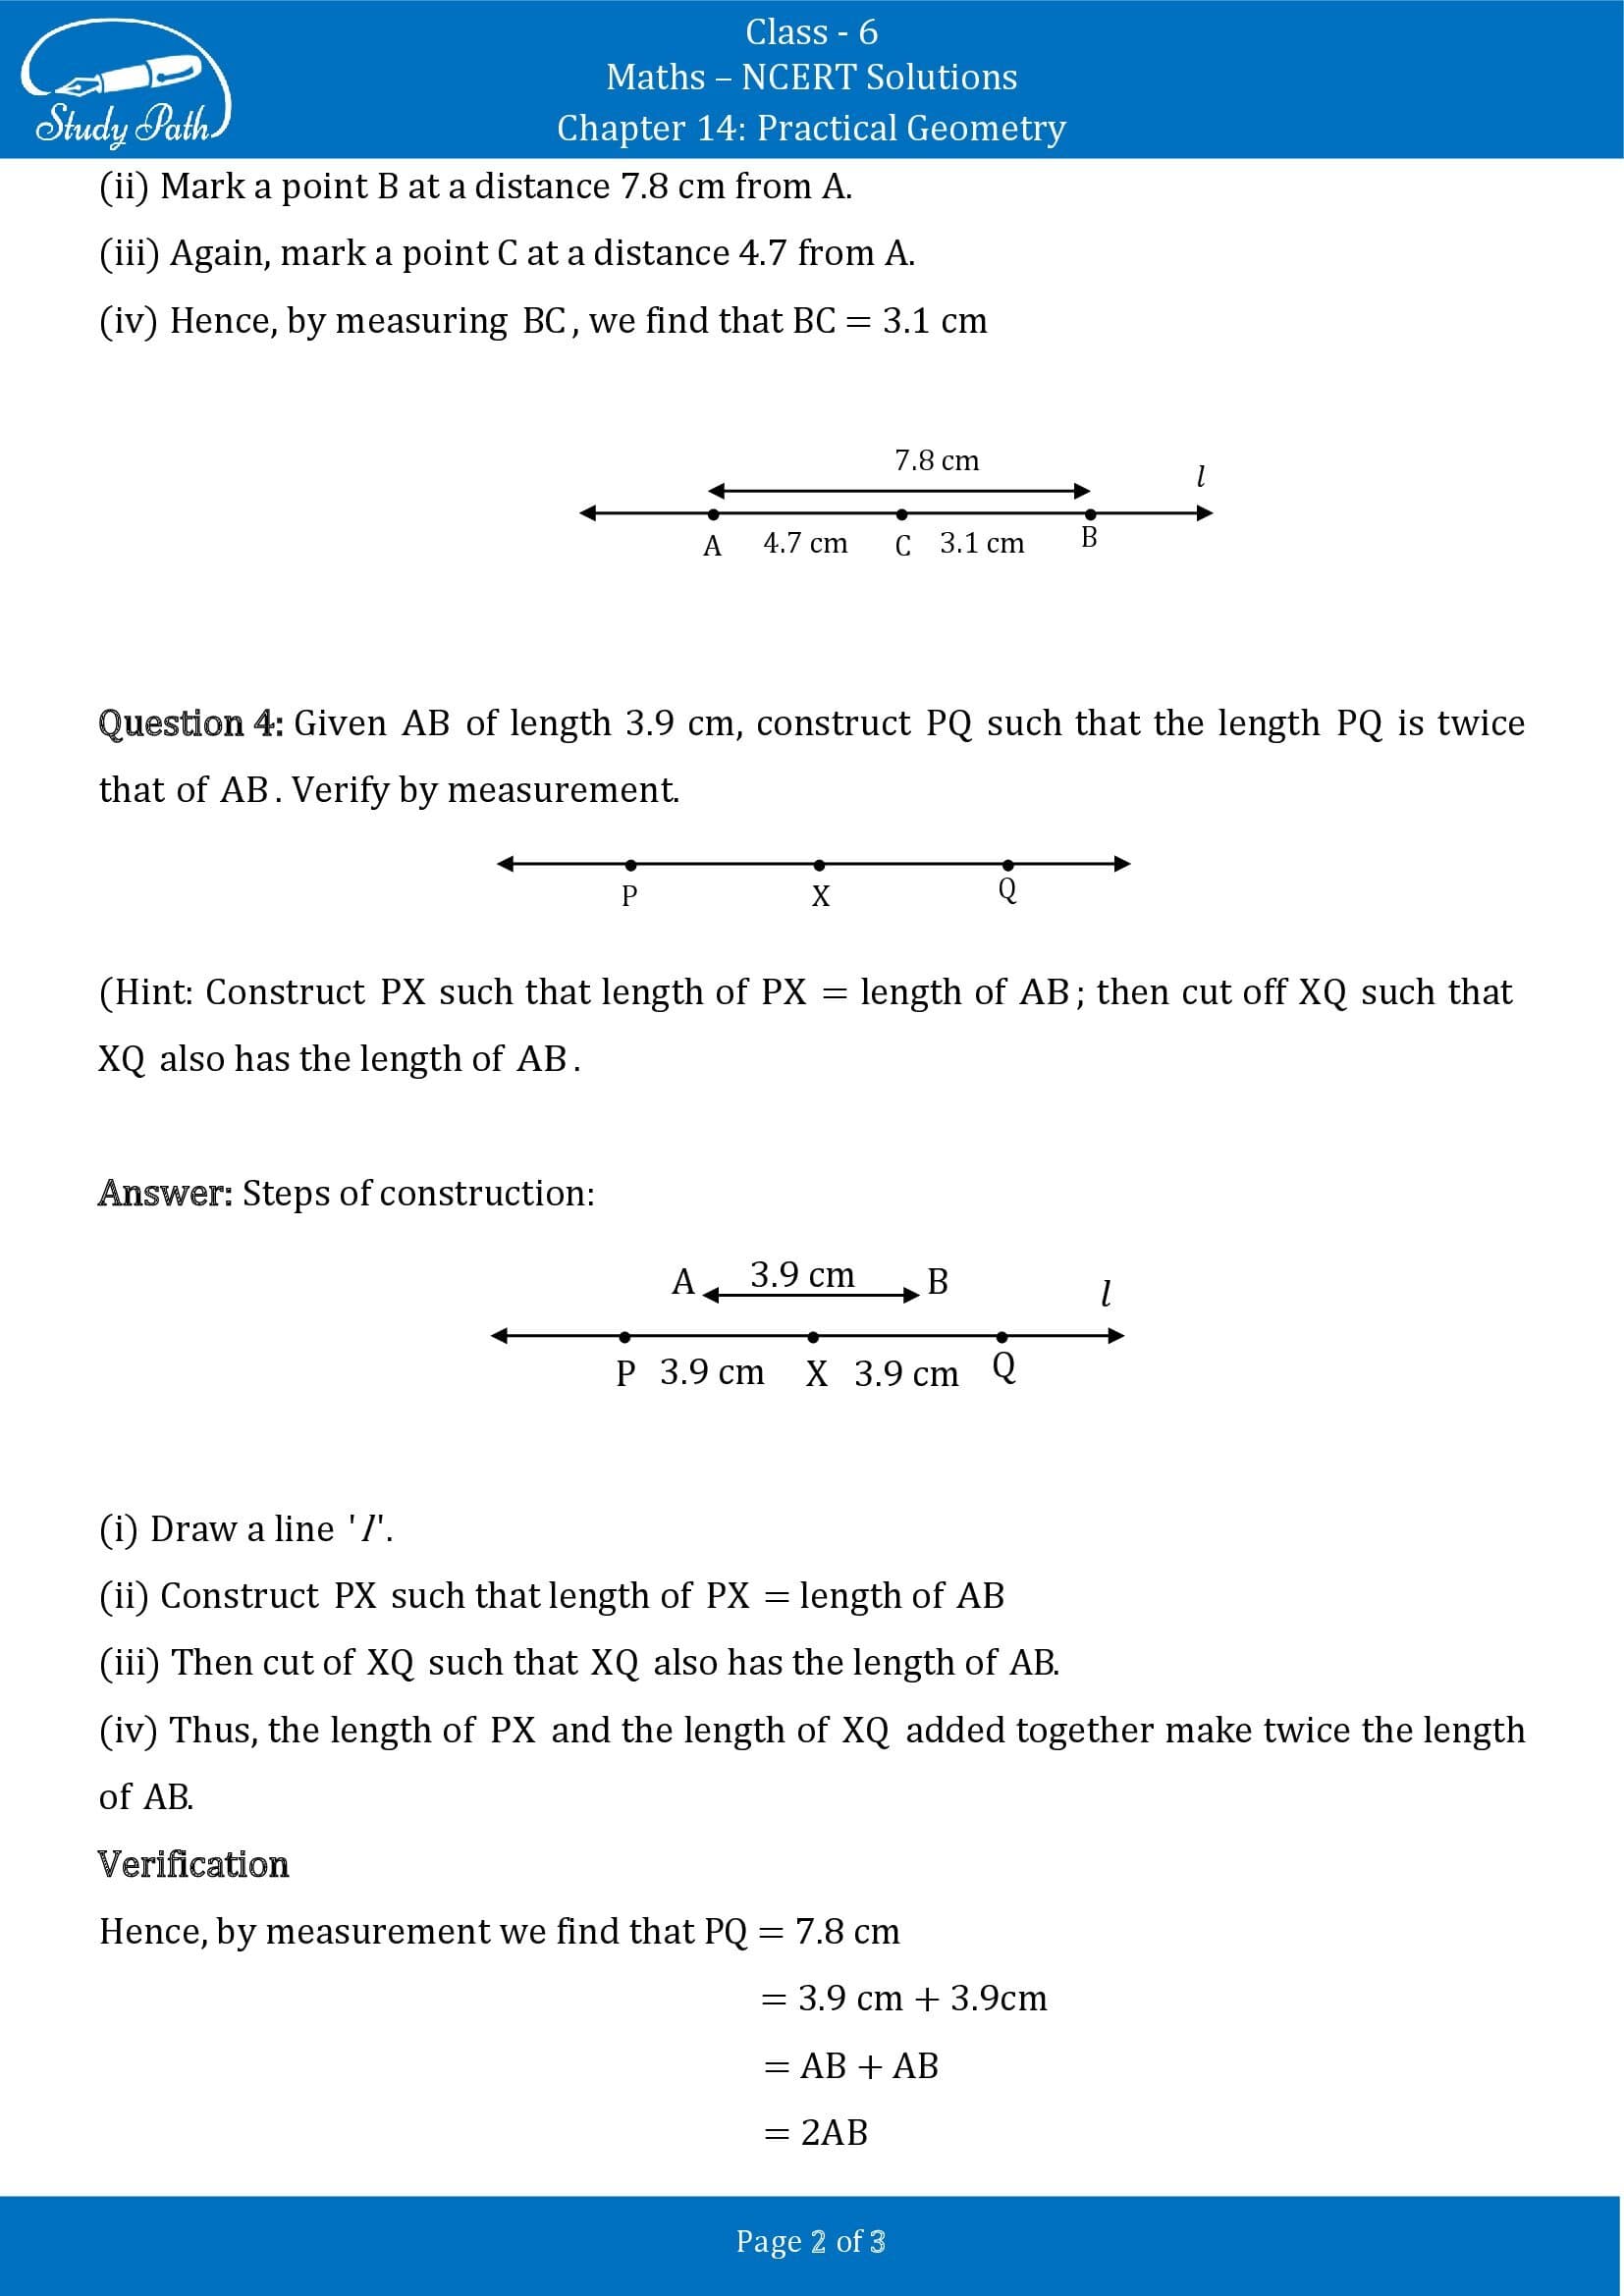 NCERT Solutions for Class 6 Maths Chapter 14 Practical Geometry Exercise 14.2 00002